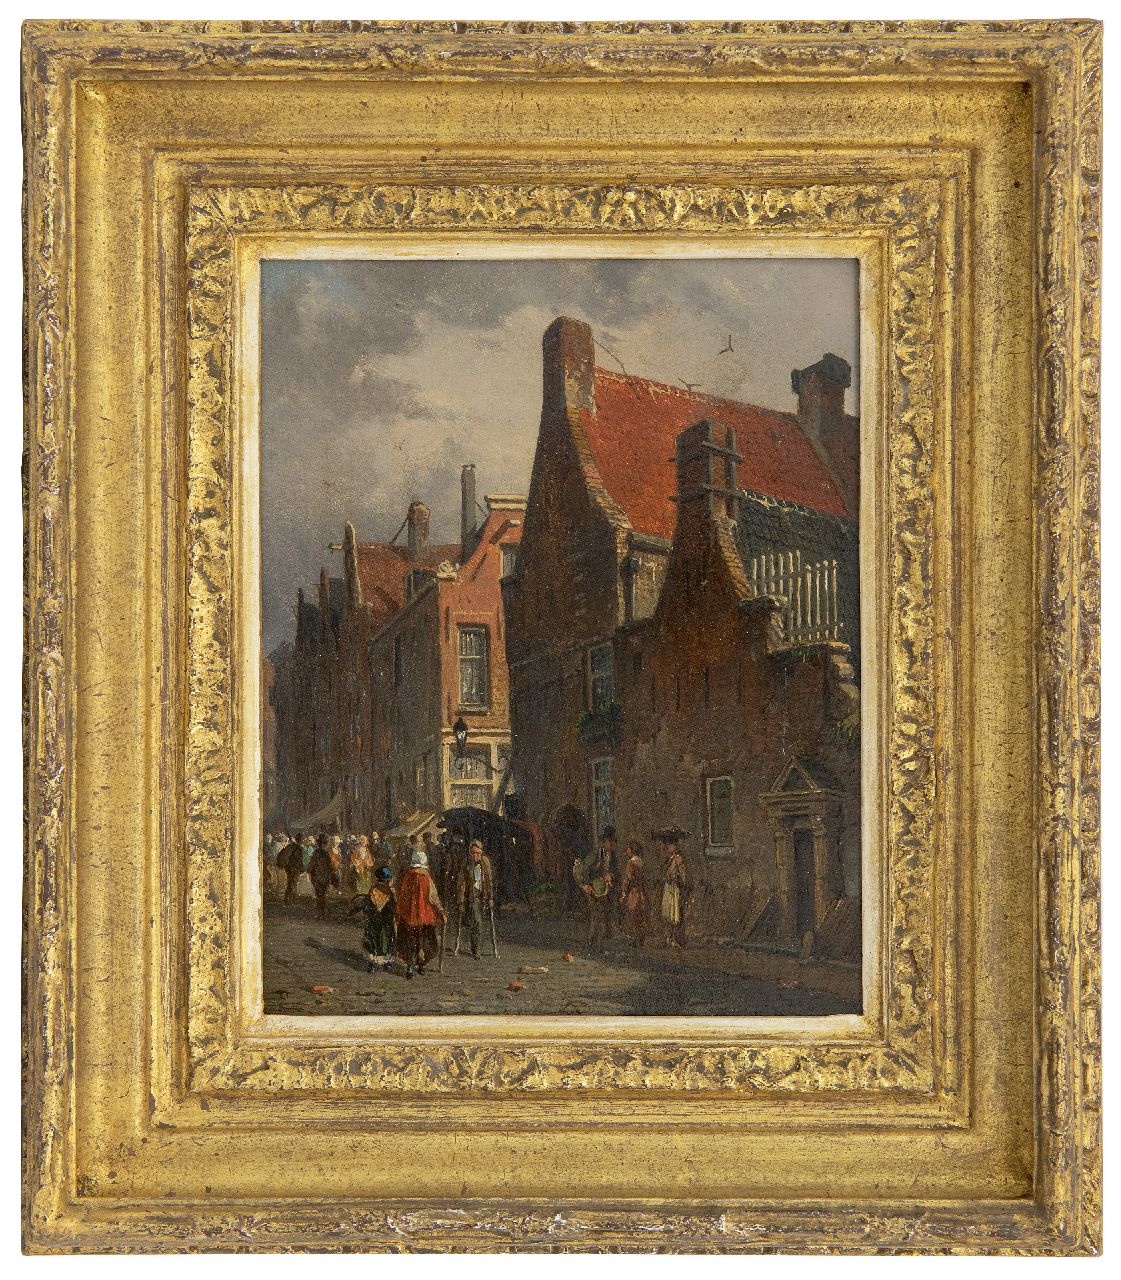 Eversen A.  | Adrianus Eversen | Paintings offered for sale | A Dutch town, oil on panel 19.5 x 15.5 cm, signed l.l. with monogram and on the reverse in full on a